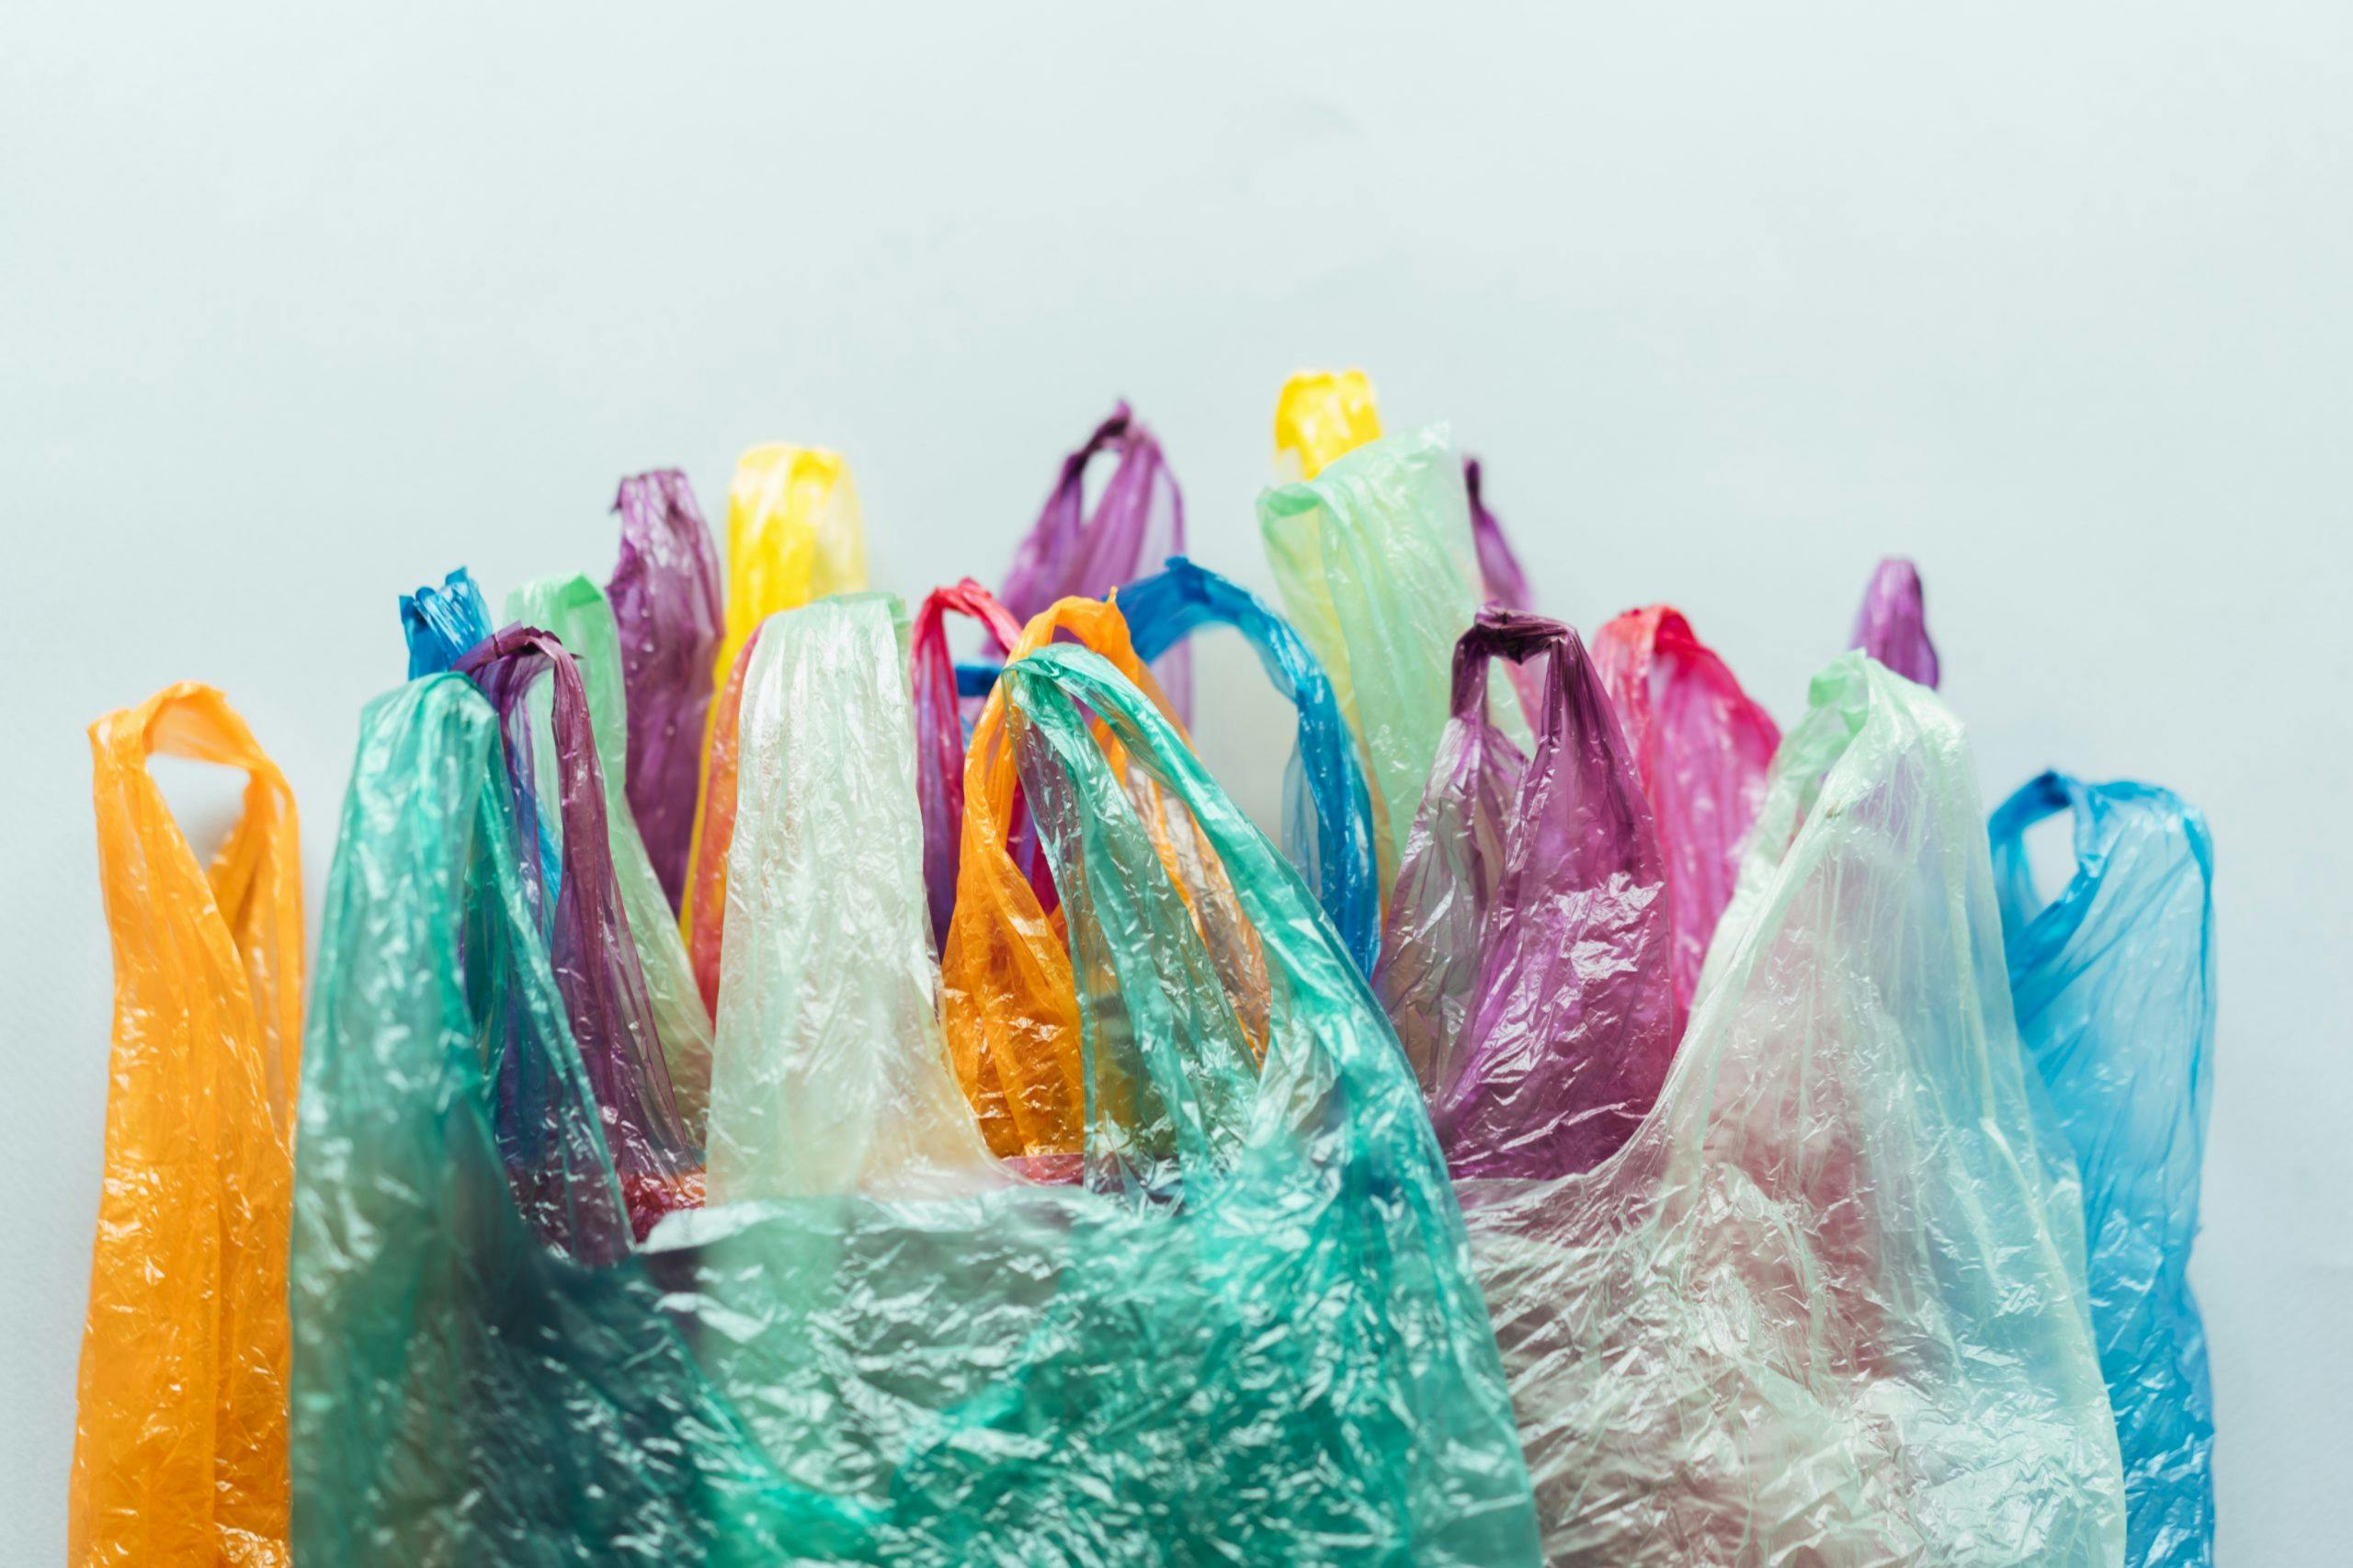 Single-use plastic in retail